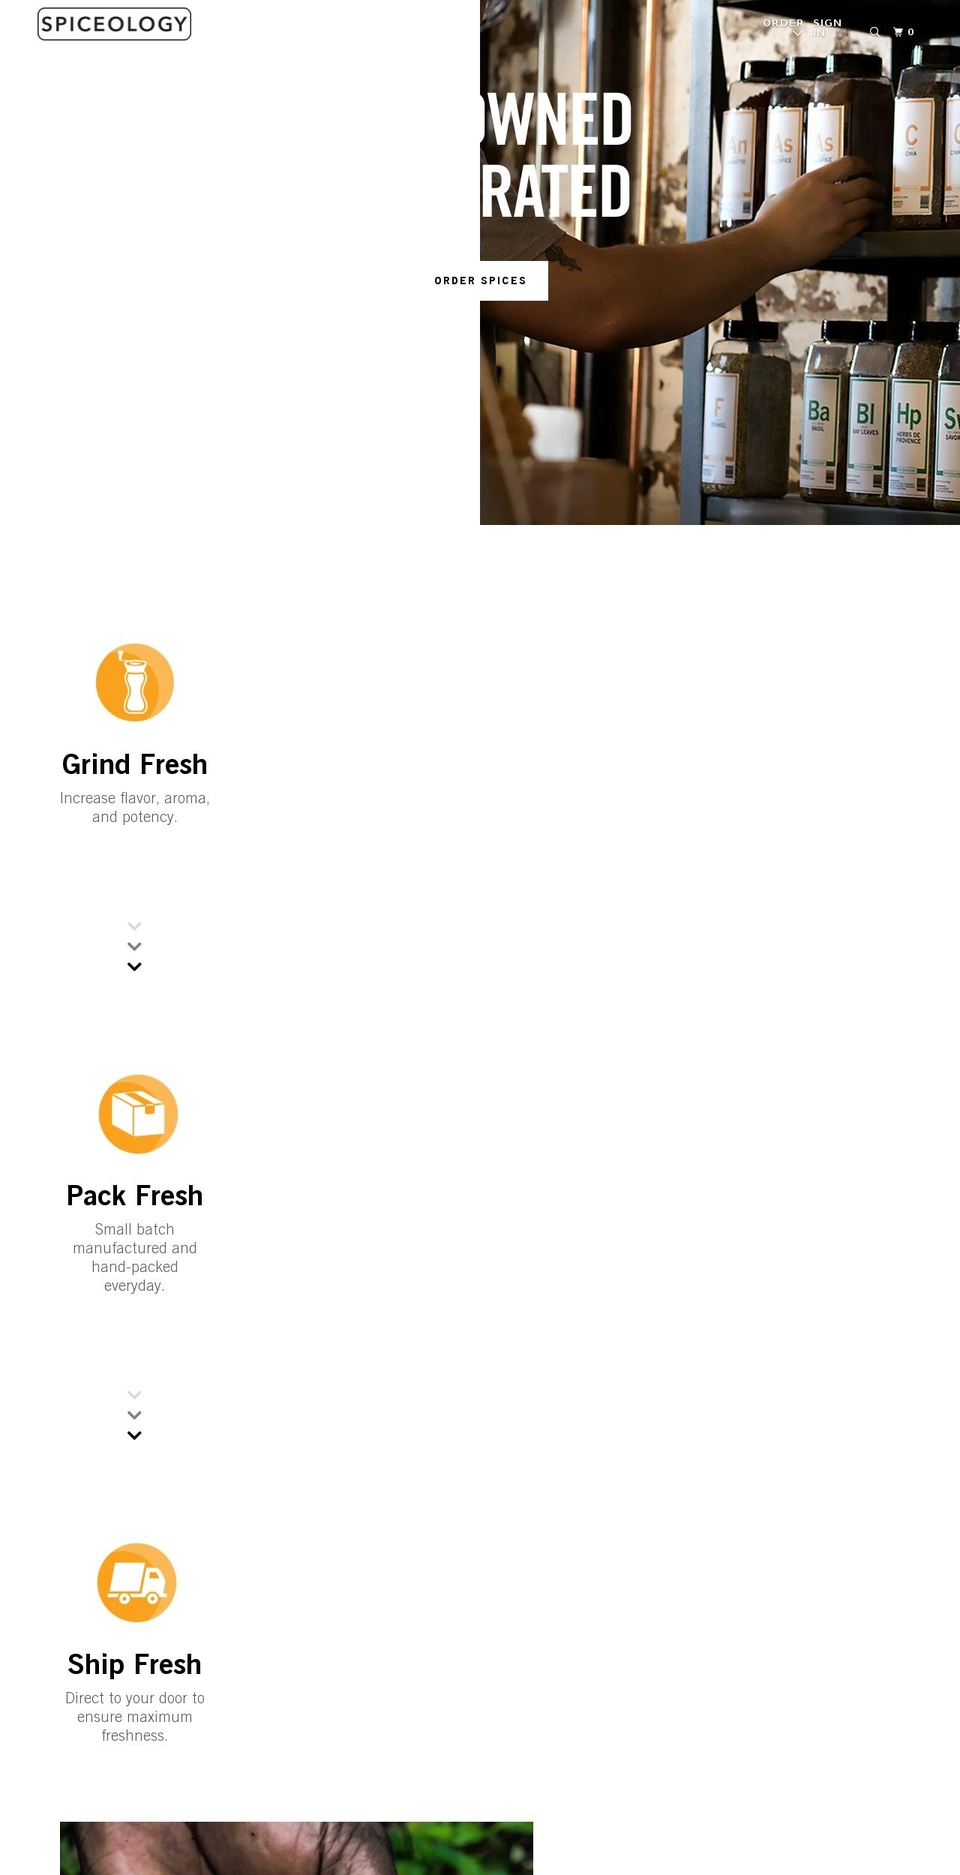 Production | BVA Shopify theme site example spiceology.co